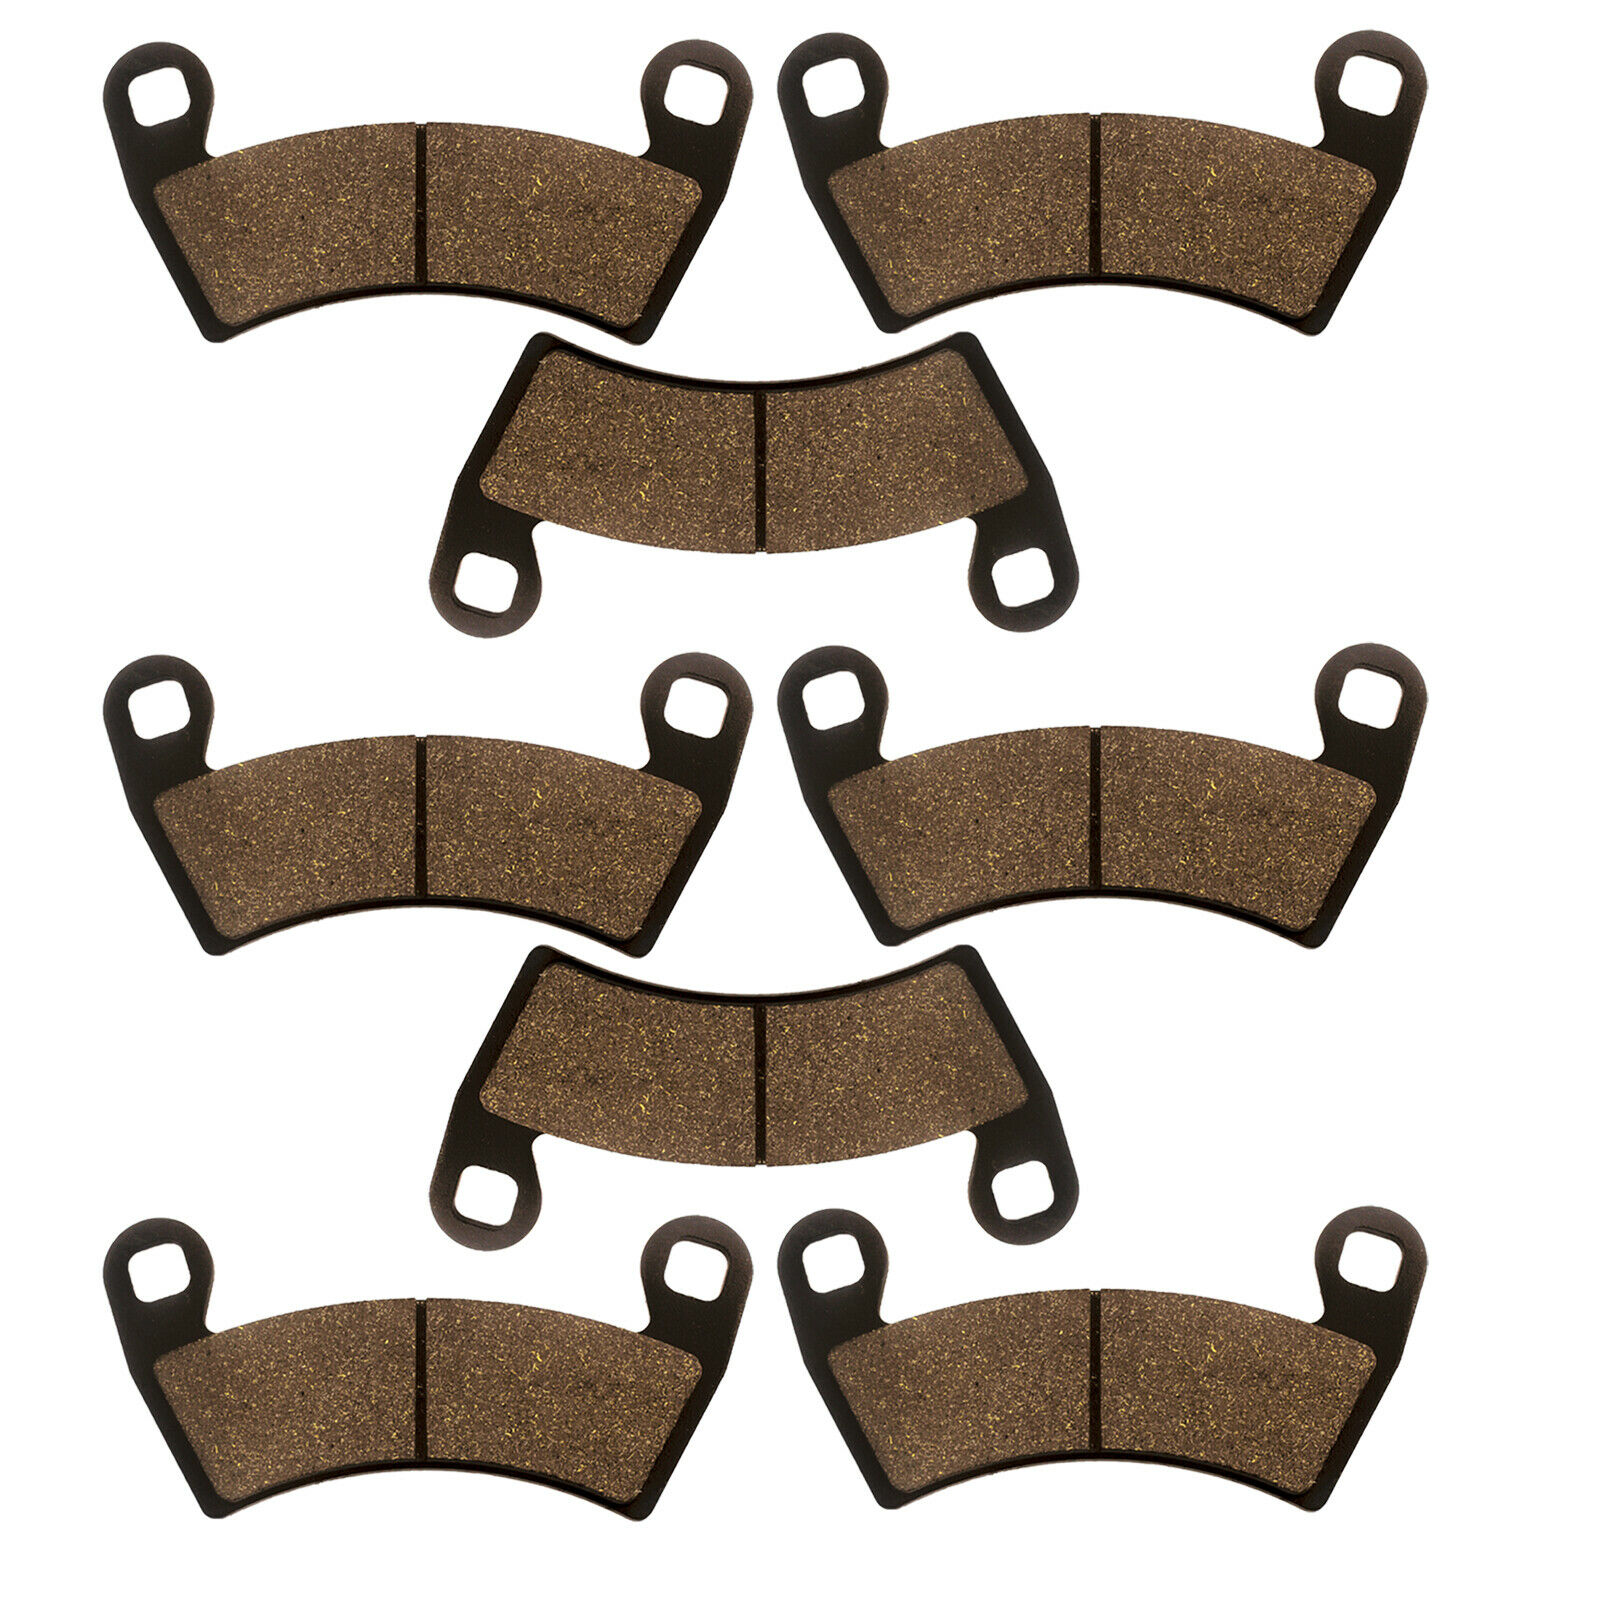 Front And Rear Brake Pads For Polaris Rzr Xp 1000 2014-2020 / 2203747 2205949